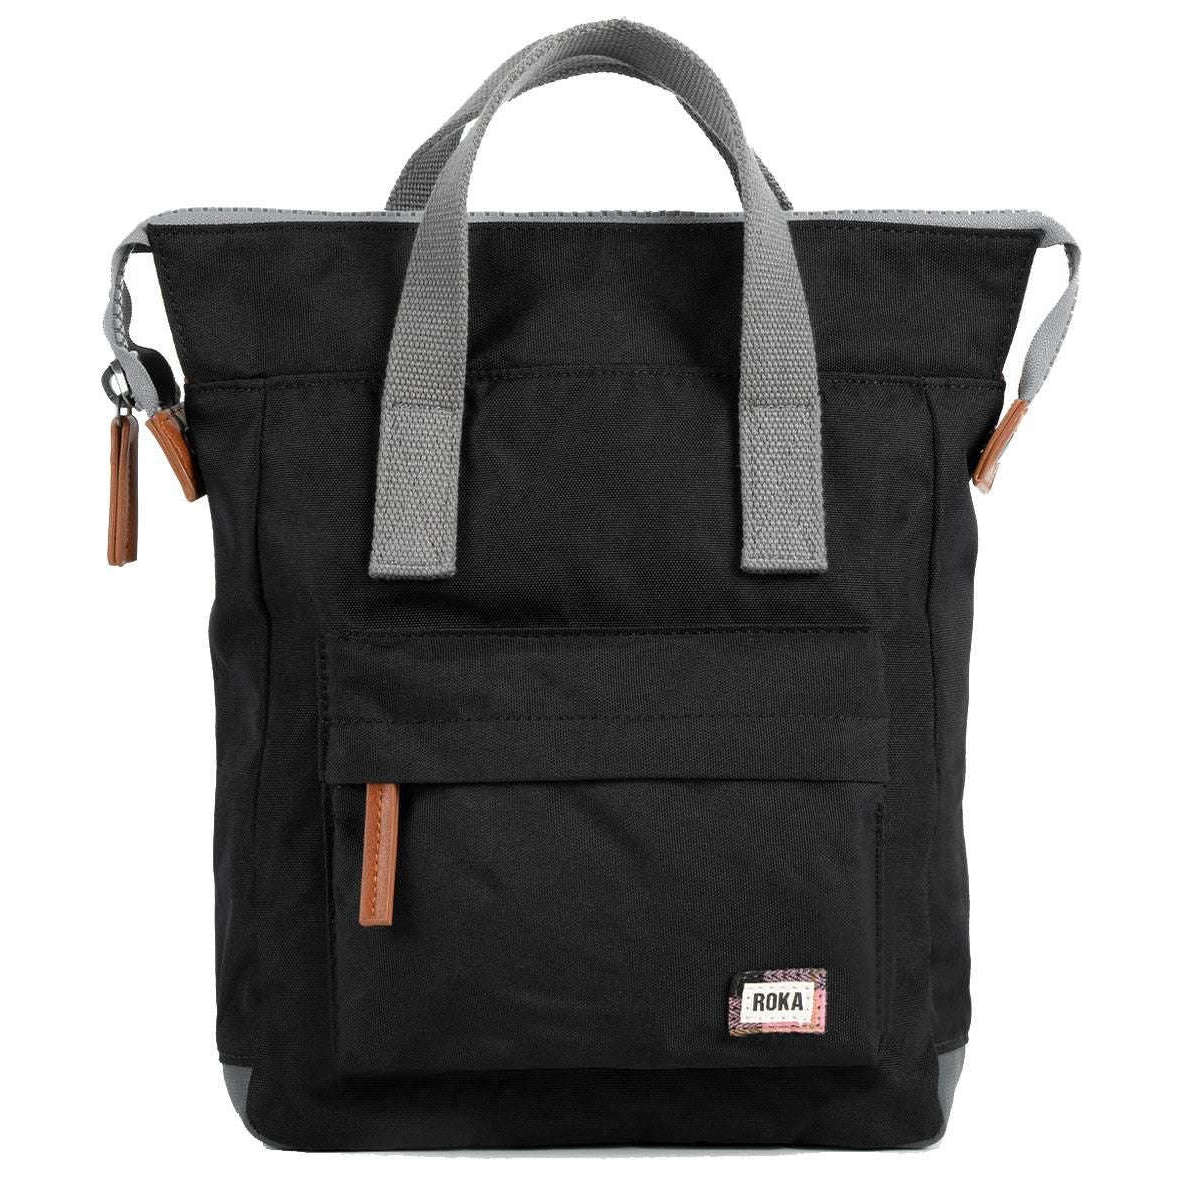 Roka Bantry B Small Sustainable Canvas Flannel Backpack - Black